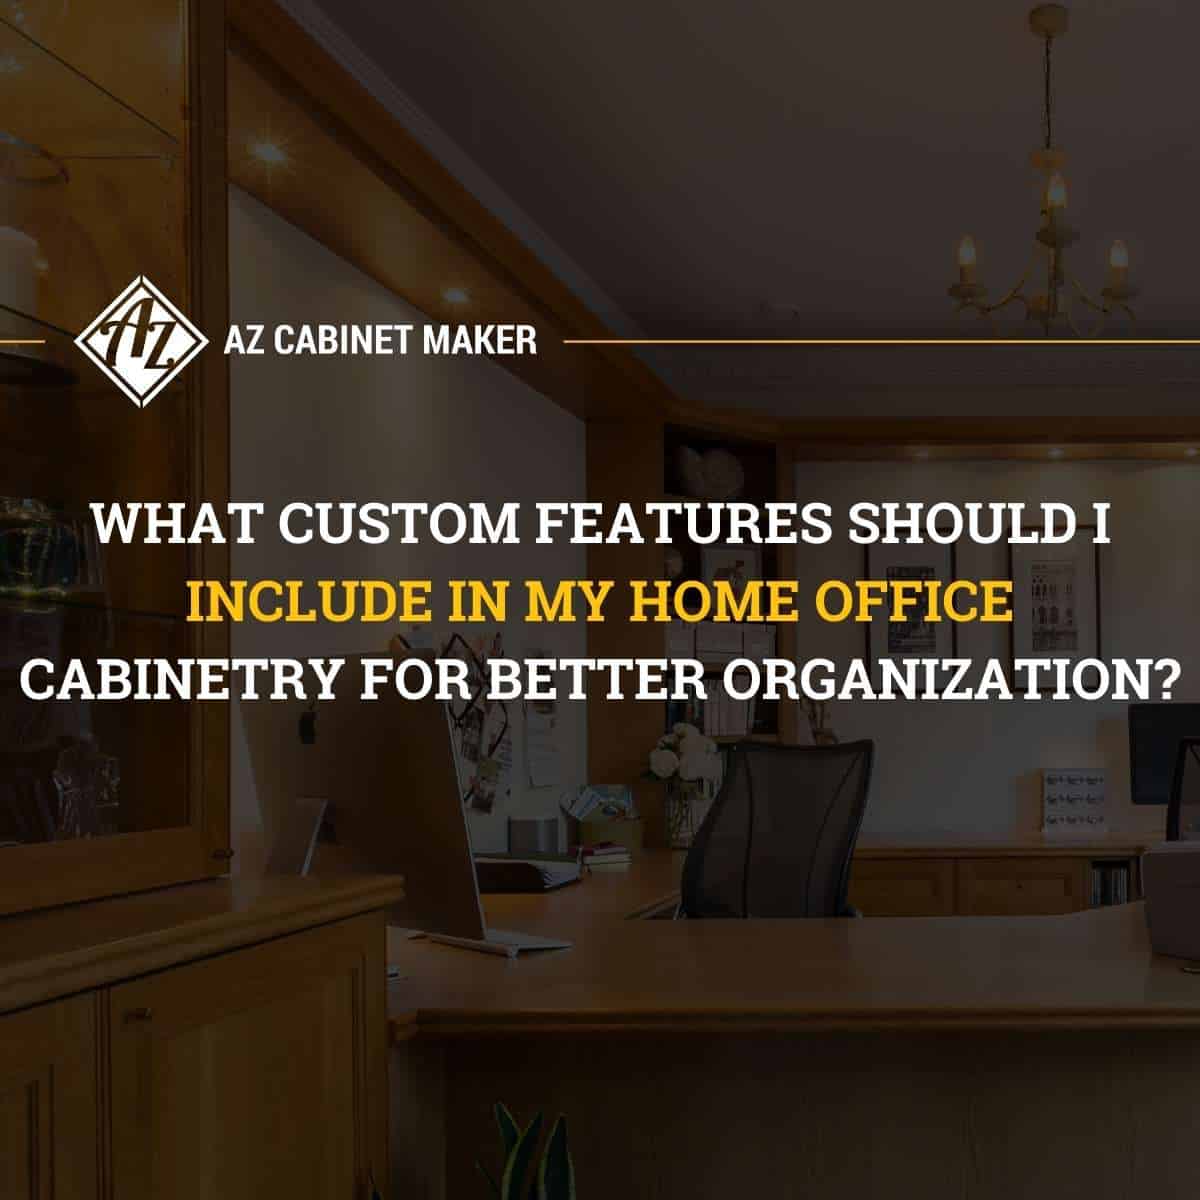 What Custom Features Should I Include in My Home Office Cabinetry for Better Organization?